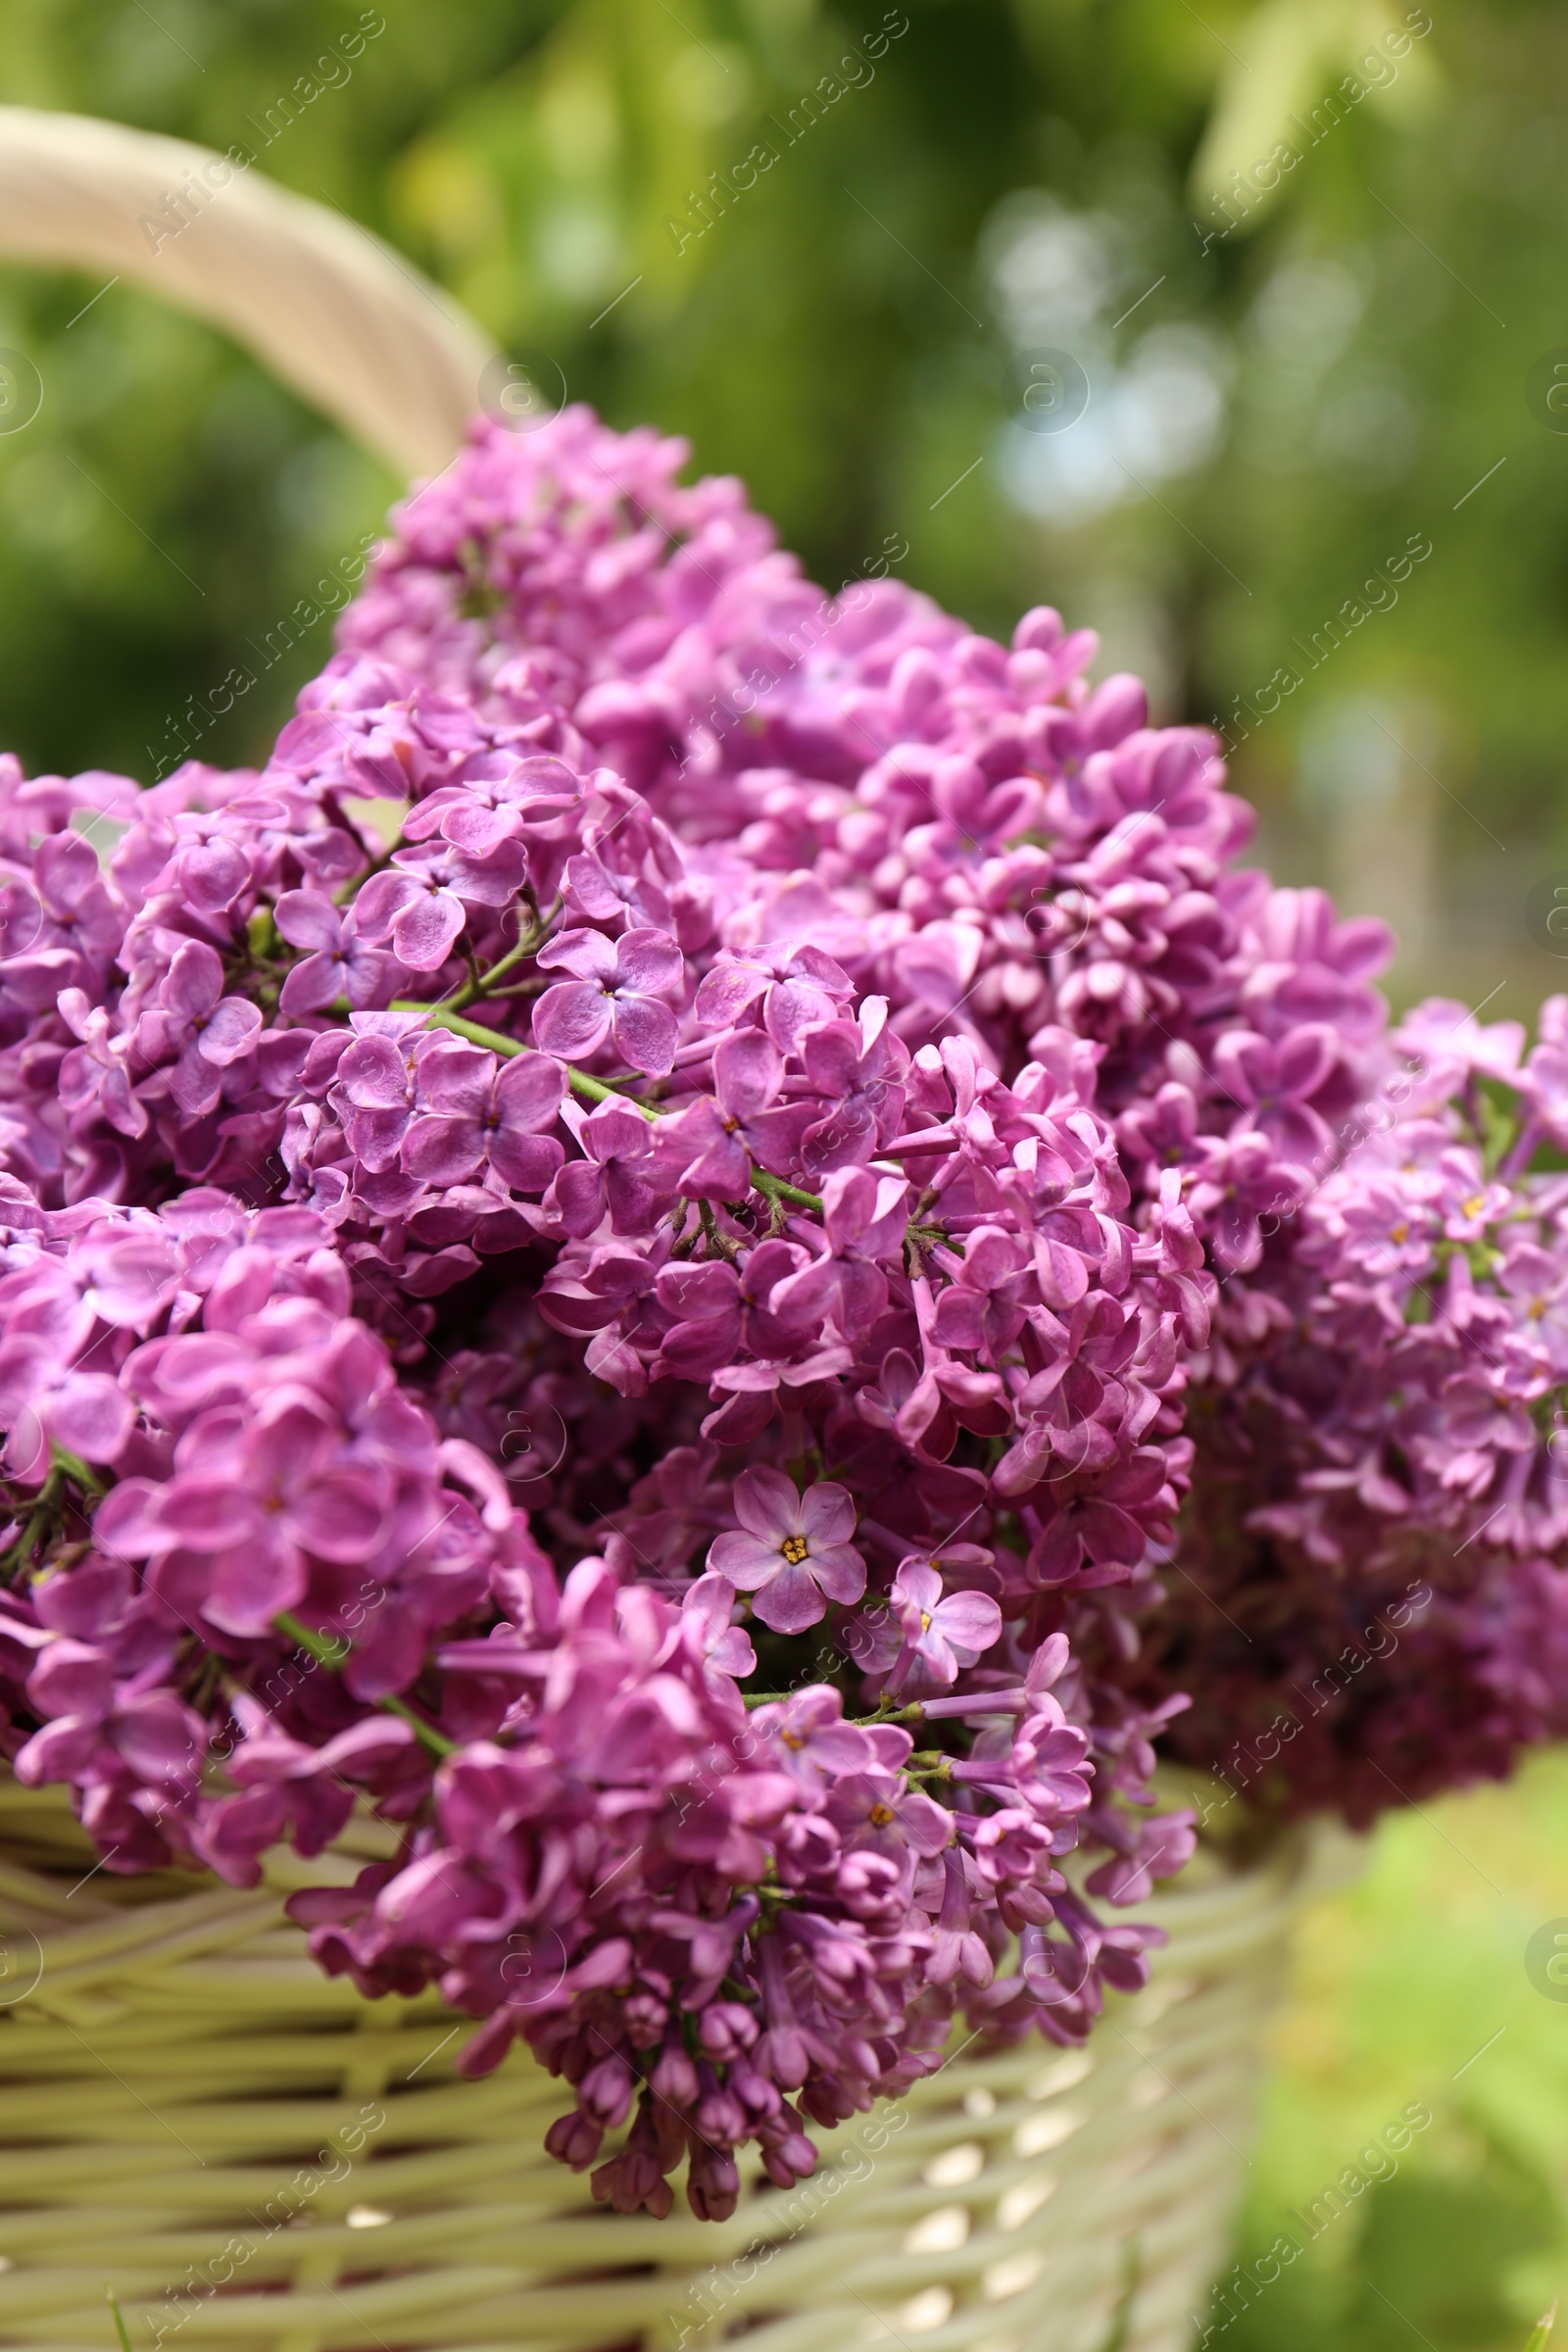 Photo of Beautiful lilac flowers in wicker basket outdoors, closeup